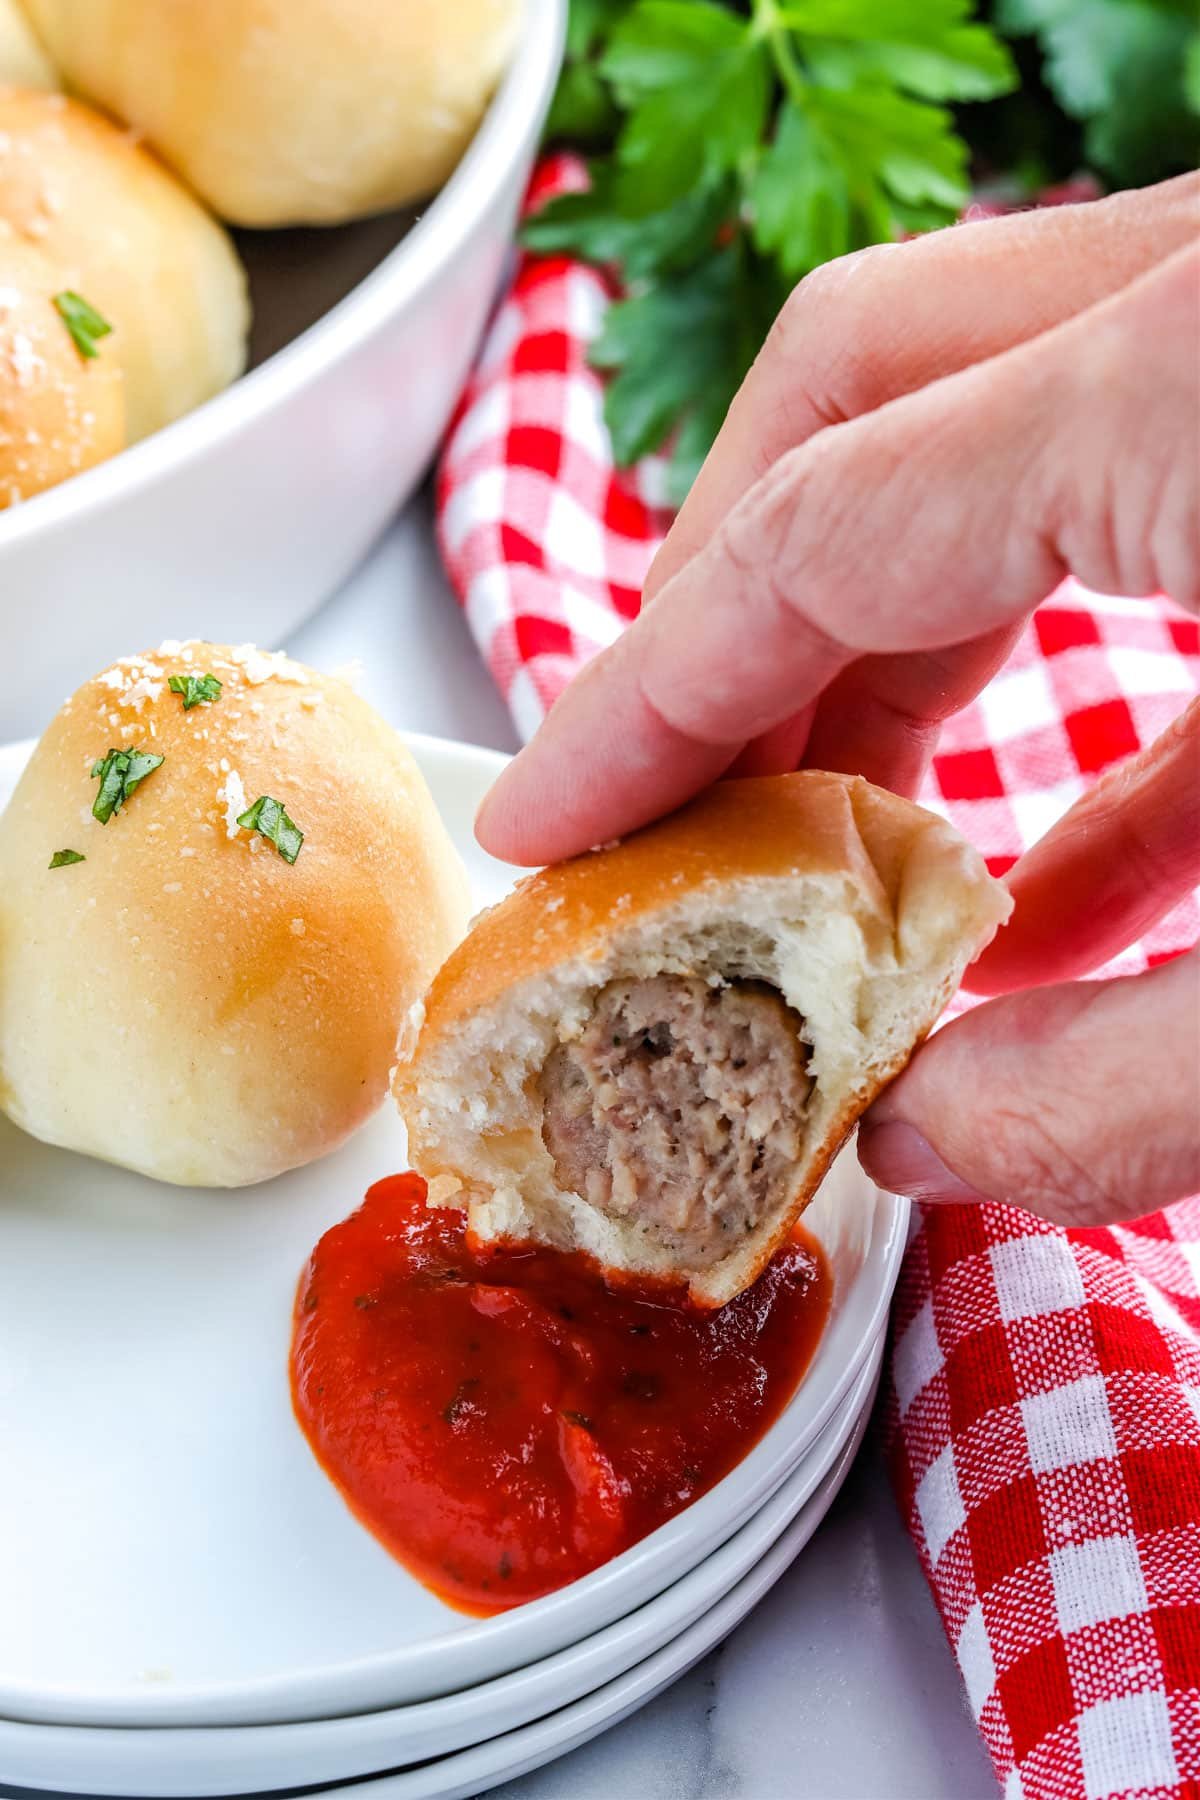 Up close of someone dipping the meatball bite into sauce.